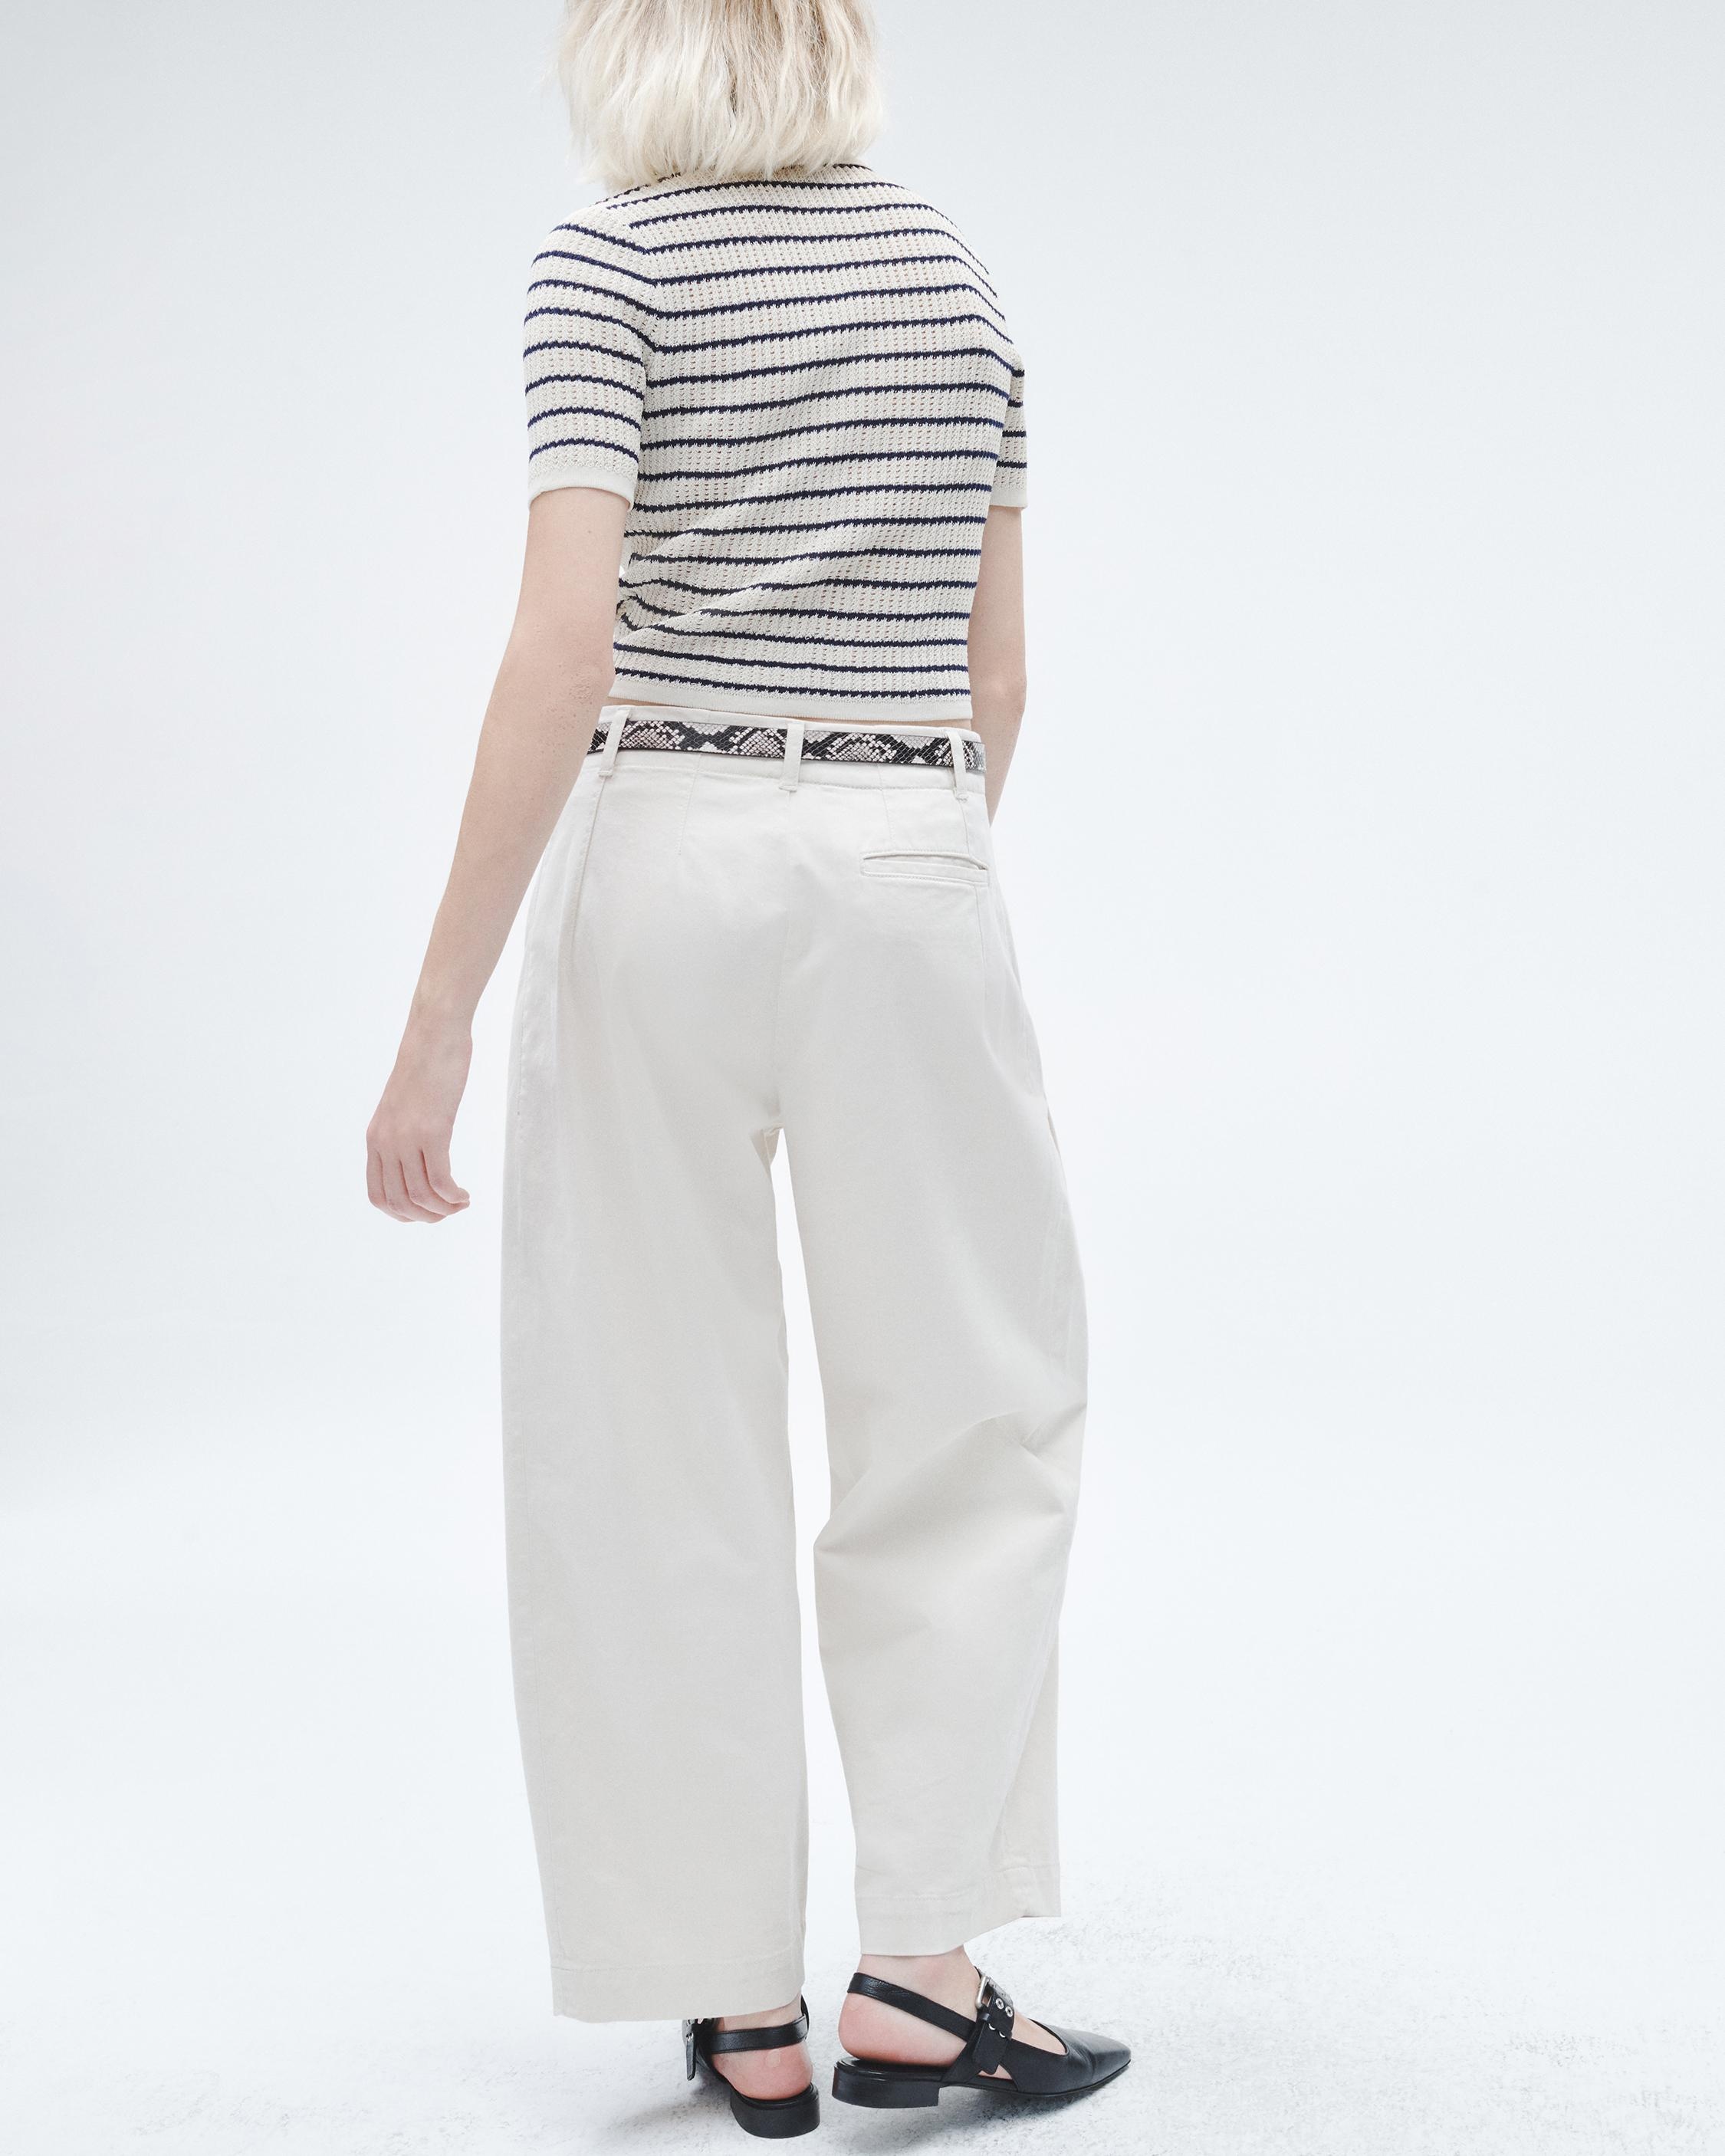 Donovan Cropped Cotton Pant
Relaxed Fit - 4